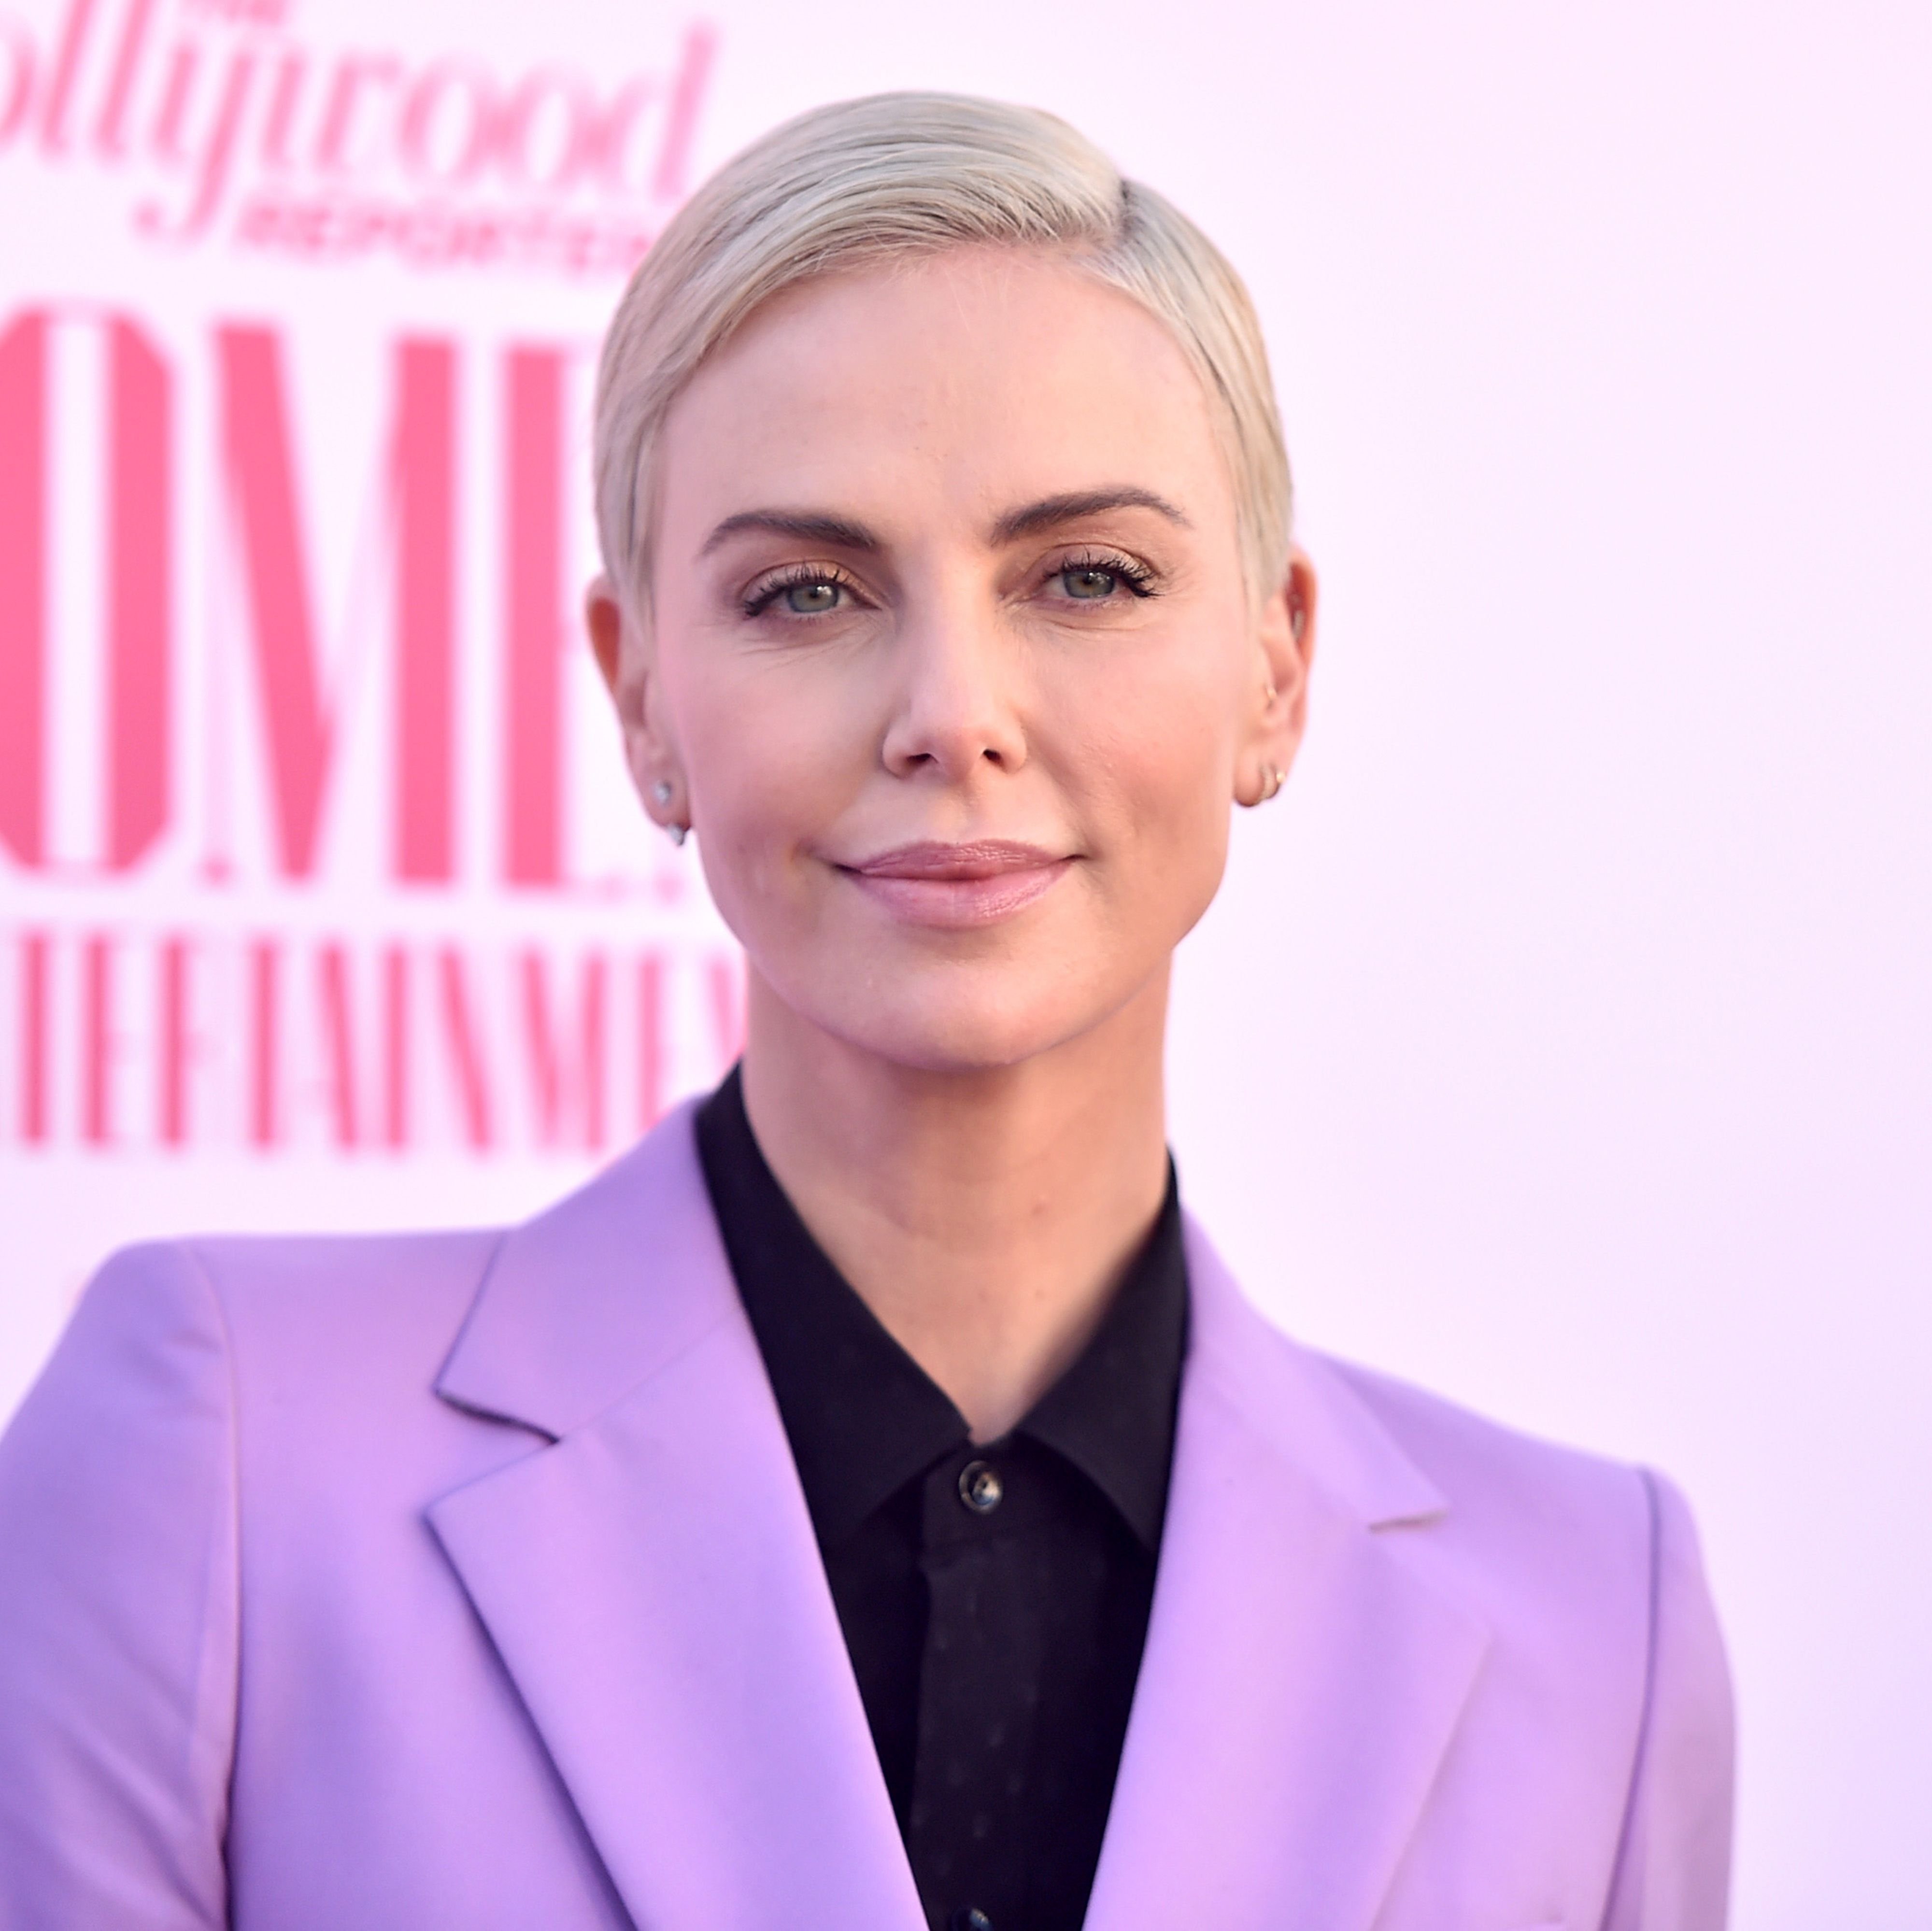 Charlize Theron at The Hollywood Reporter's Power 100 Women in Entertainment at Milk Studios on December 11, 2019 | Photo: Getty Images